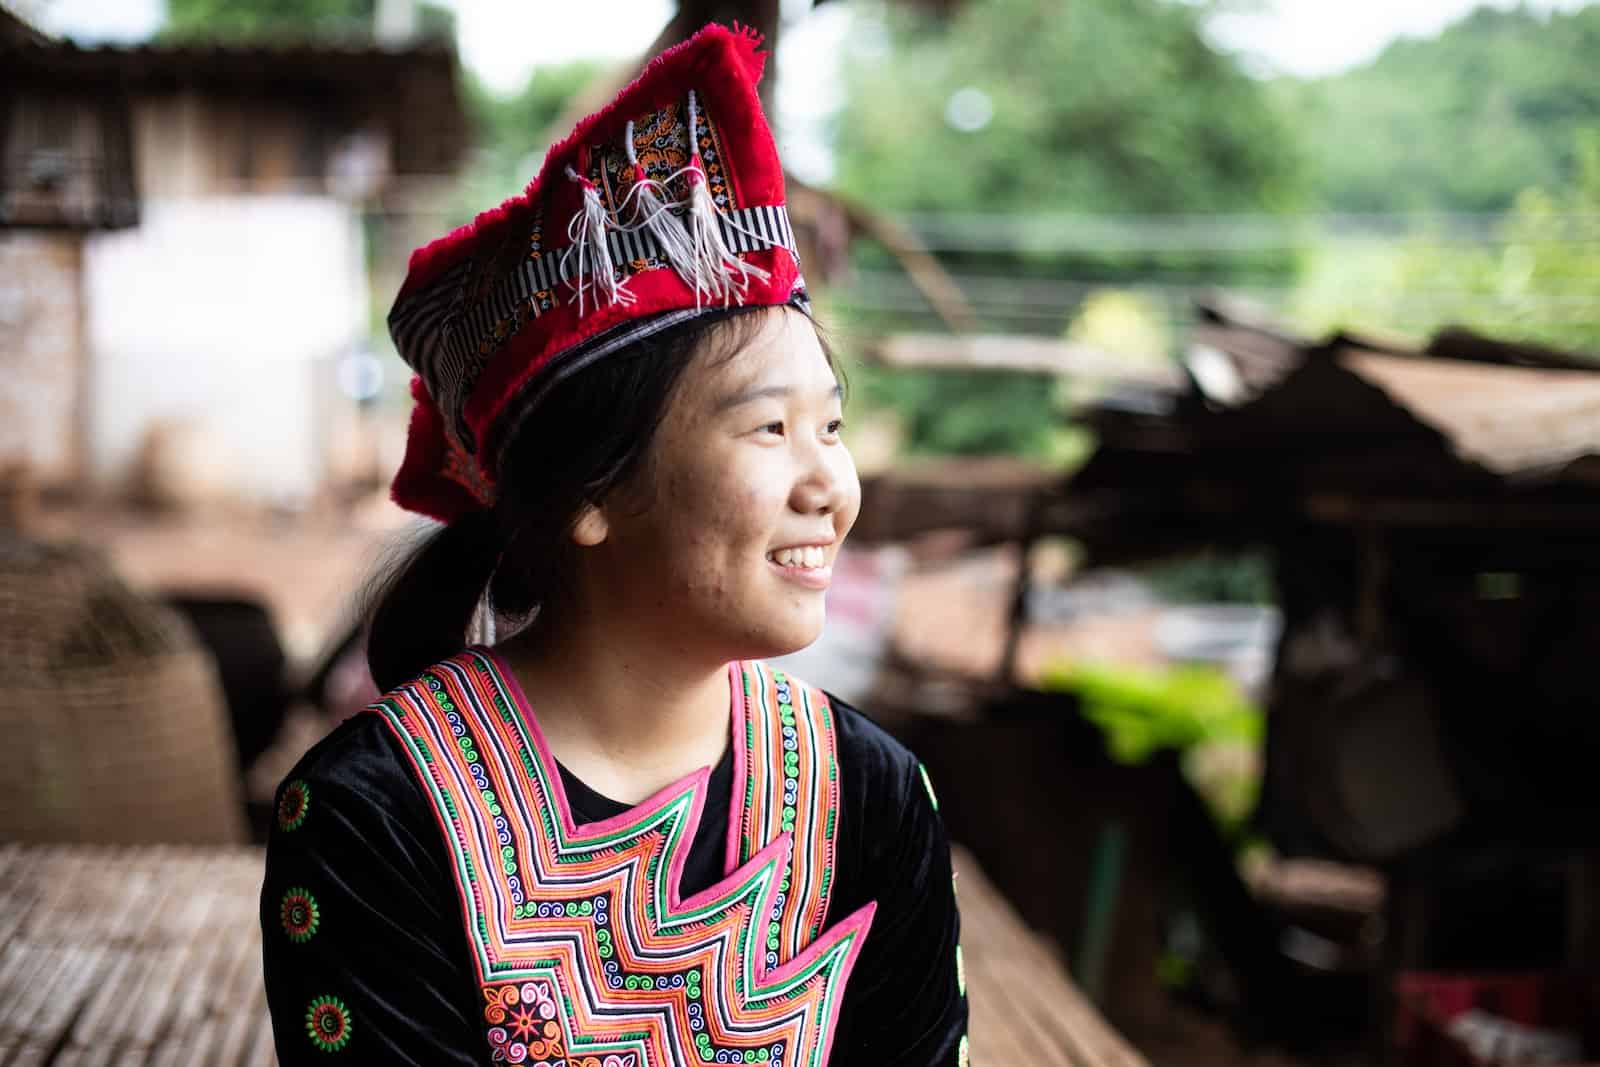 A girl wearing traditional Hmong clothing looks to the side, smiling.